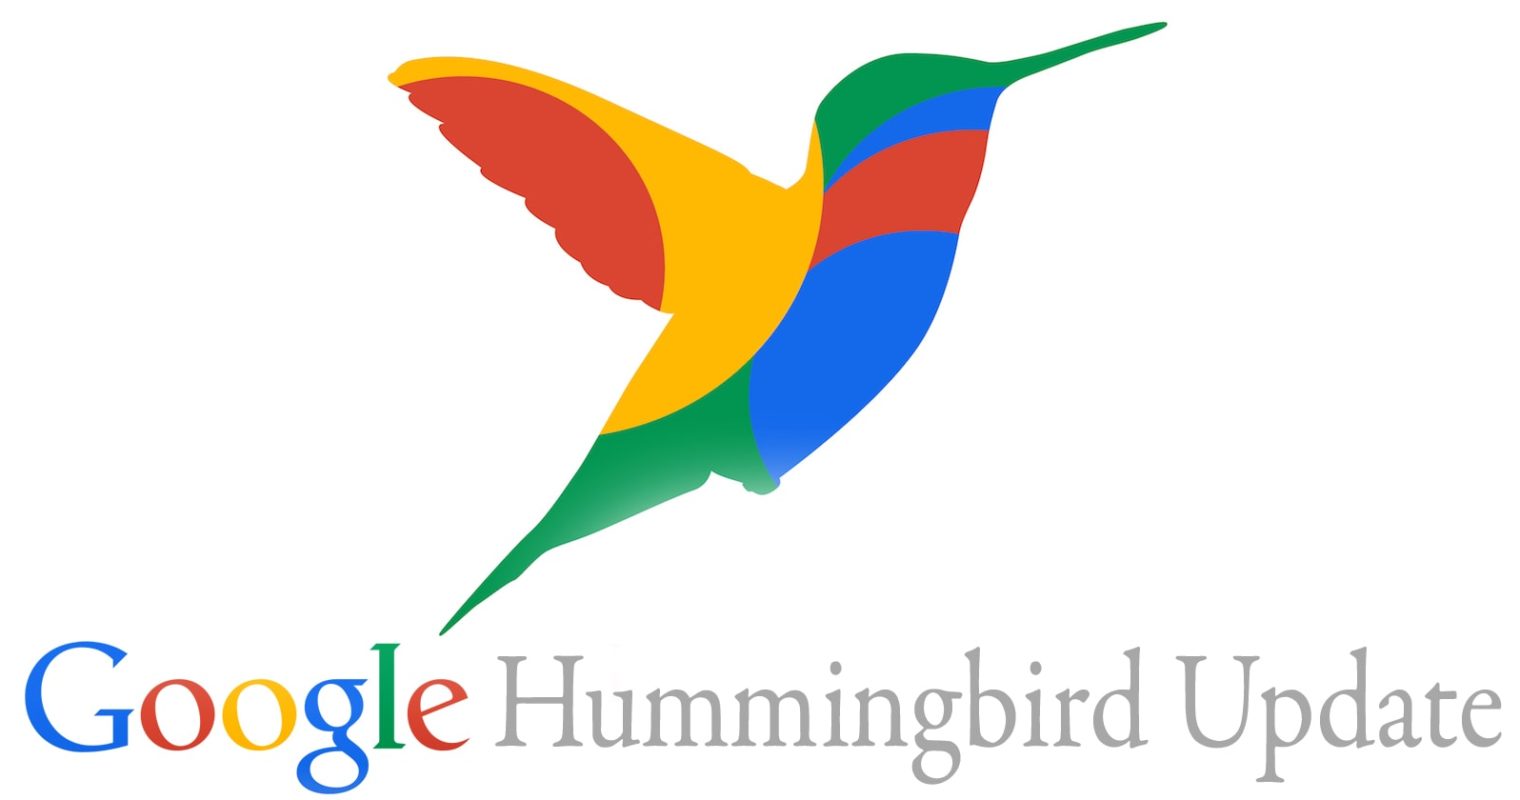 How the Google Hummingbird Update Changed Search